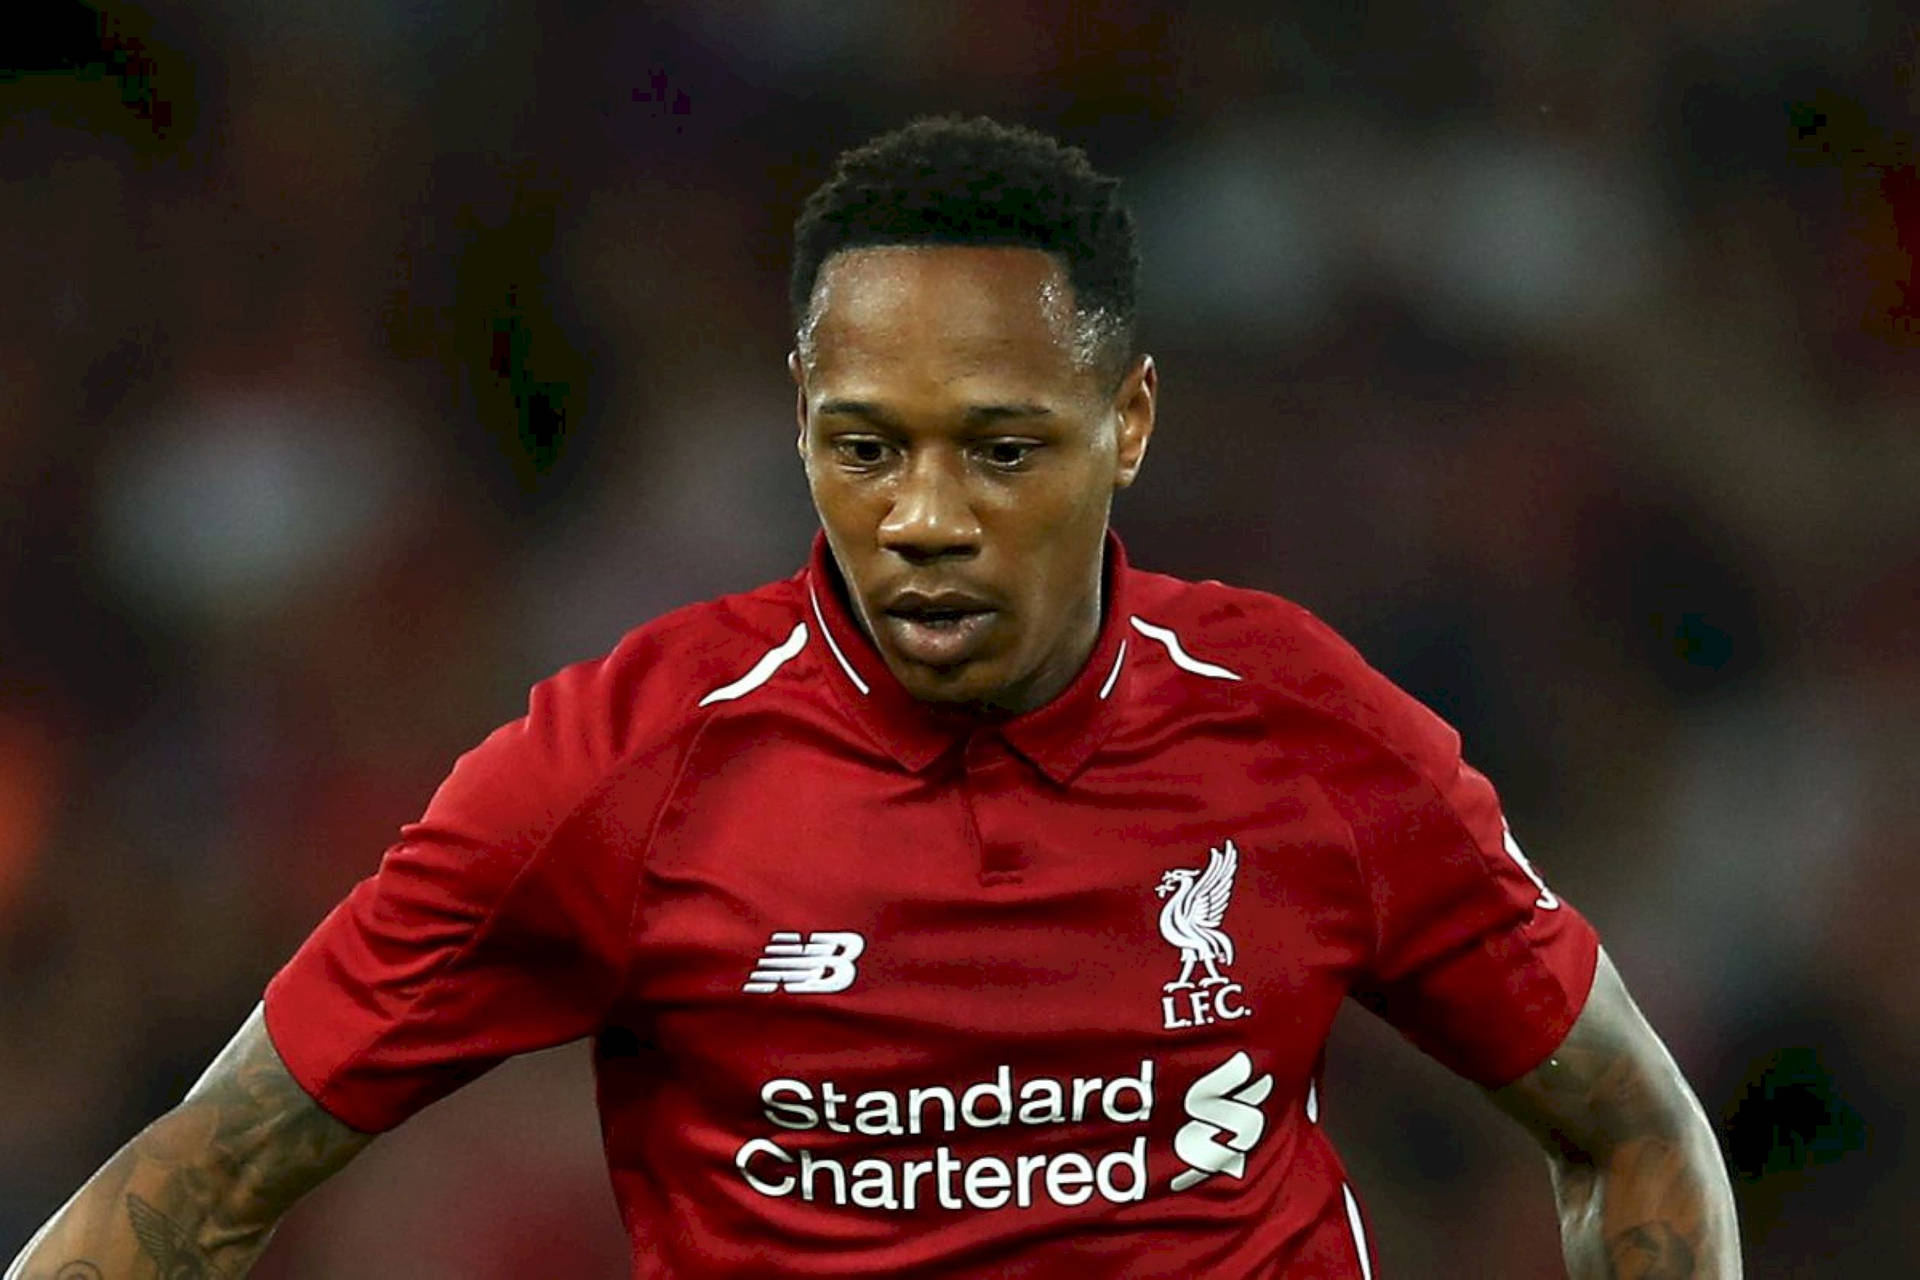 Nathaniel Clyne Looking Down During Match Wallpaper